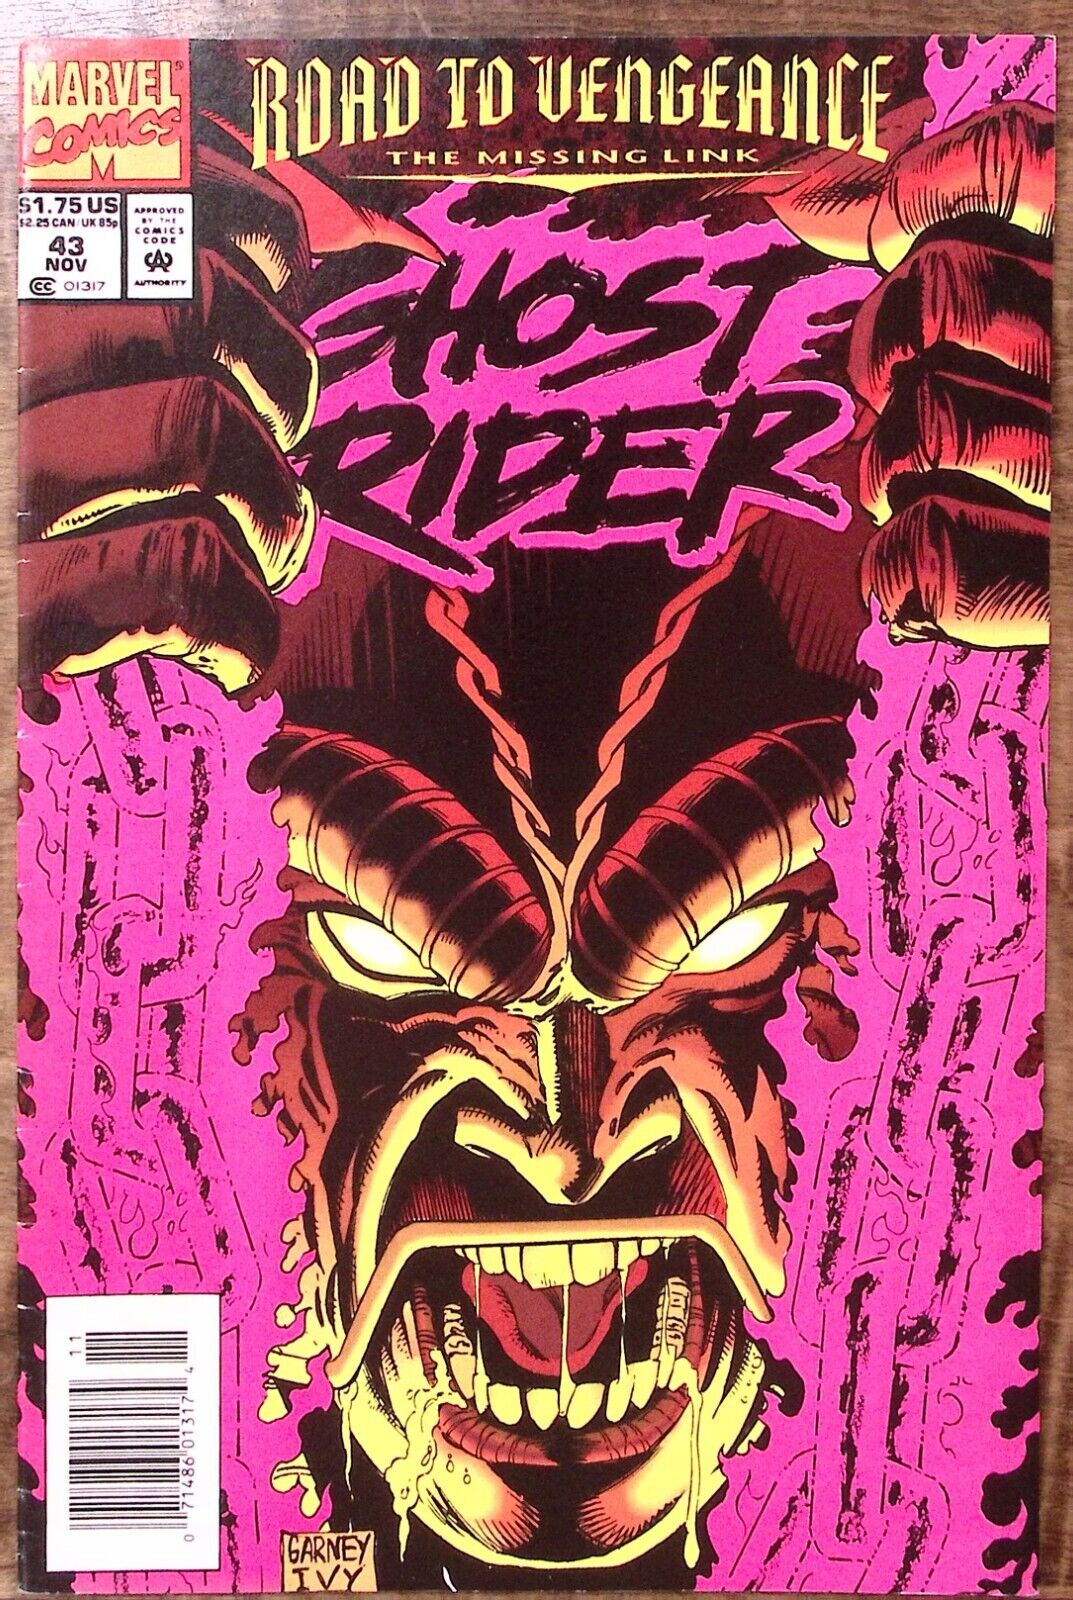 1993 GHOST RIDER NOV #43 MARVEL COMICS ROAD TO VENGEANCE THE MISSING LINK Z3584